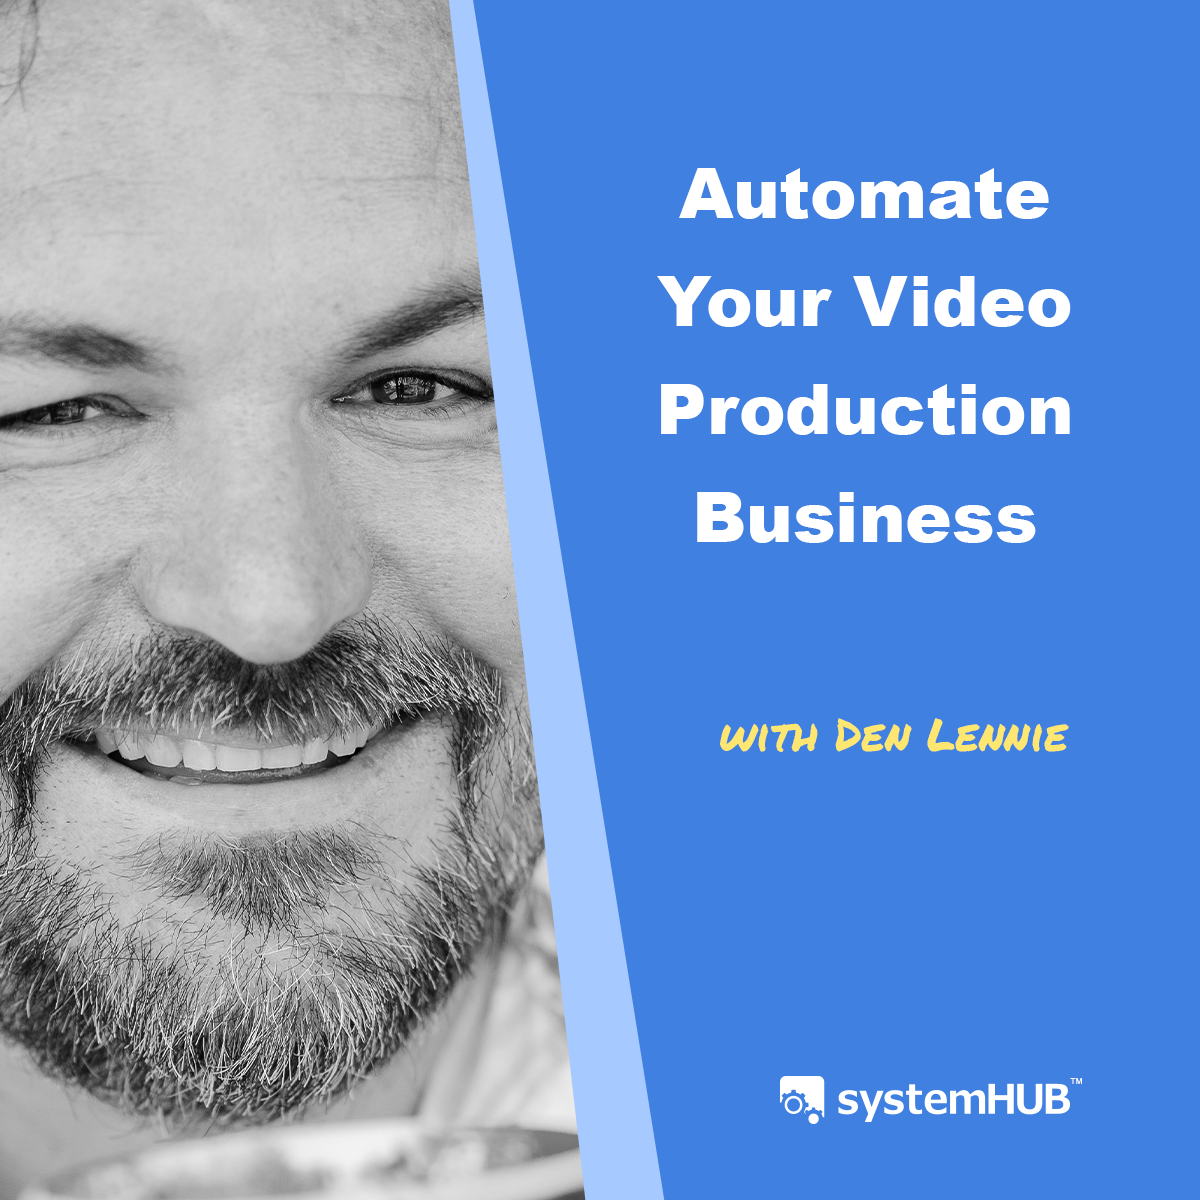 The Video Production Operating System with Den Lennie